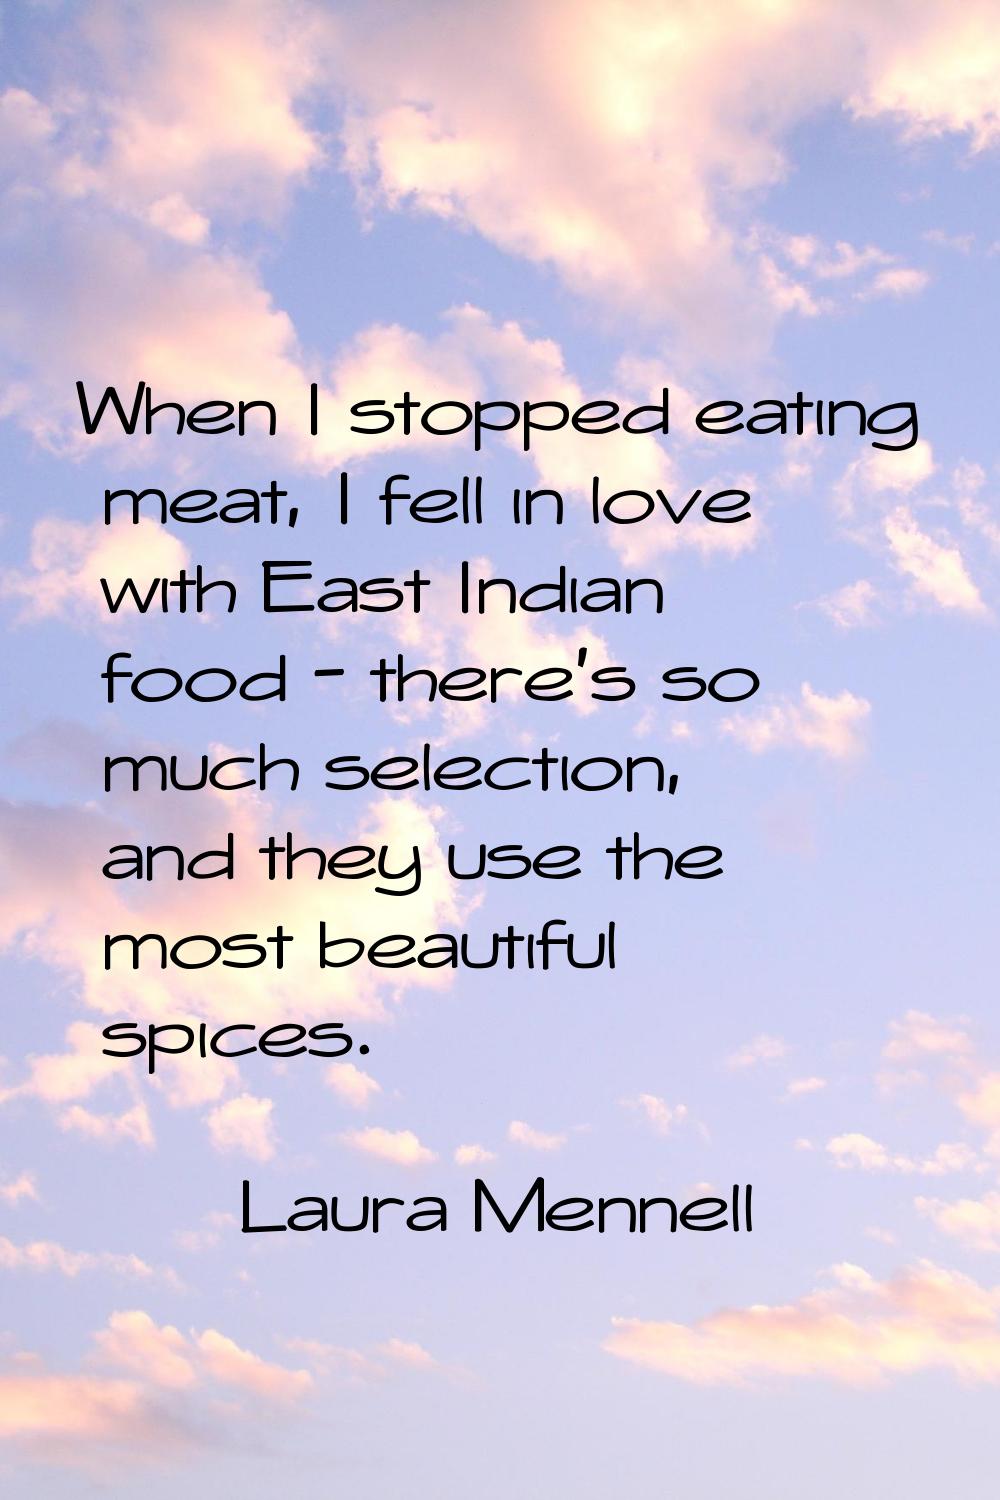 When I stopped eating meat, I fell in love with East Indian food - there's so much selection, and t